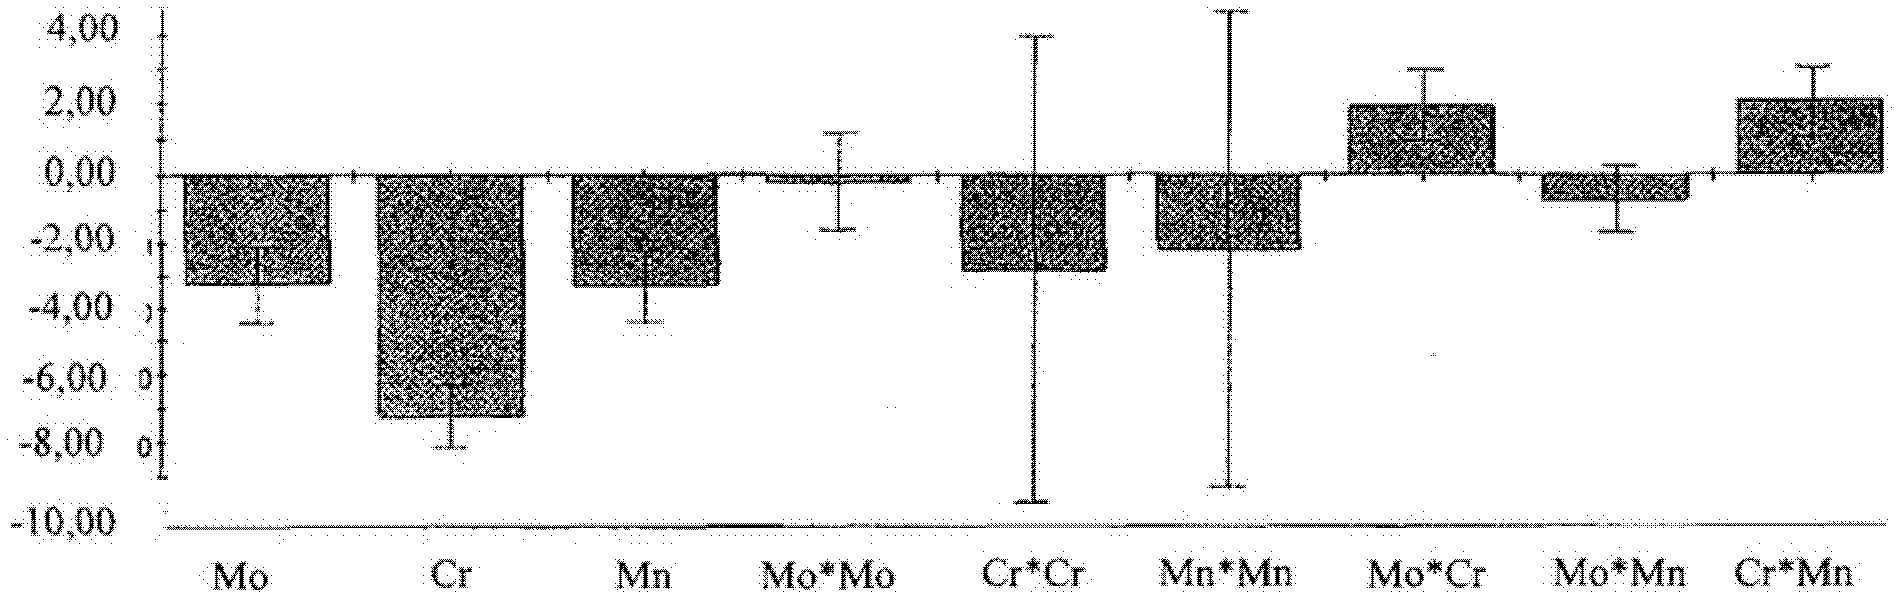 Method for determining the machinability of a compacted graphite iron